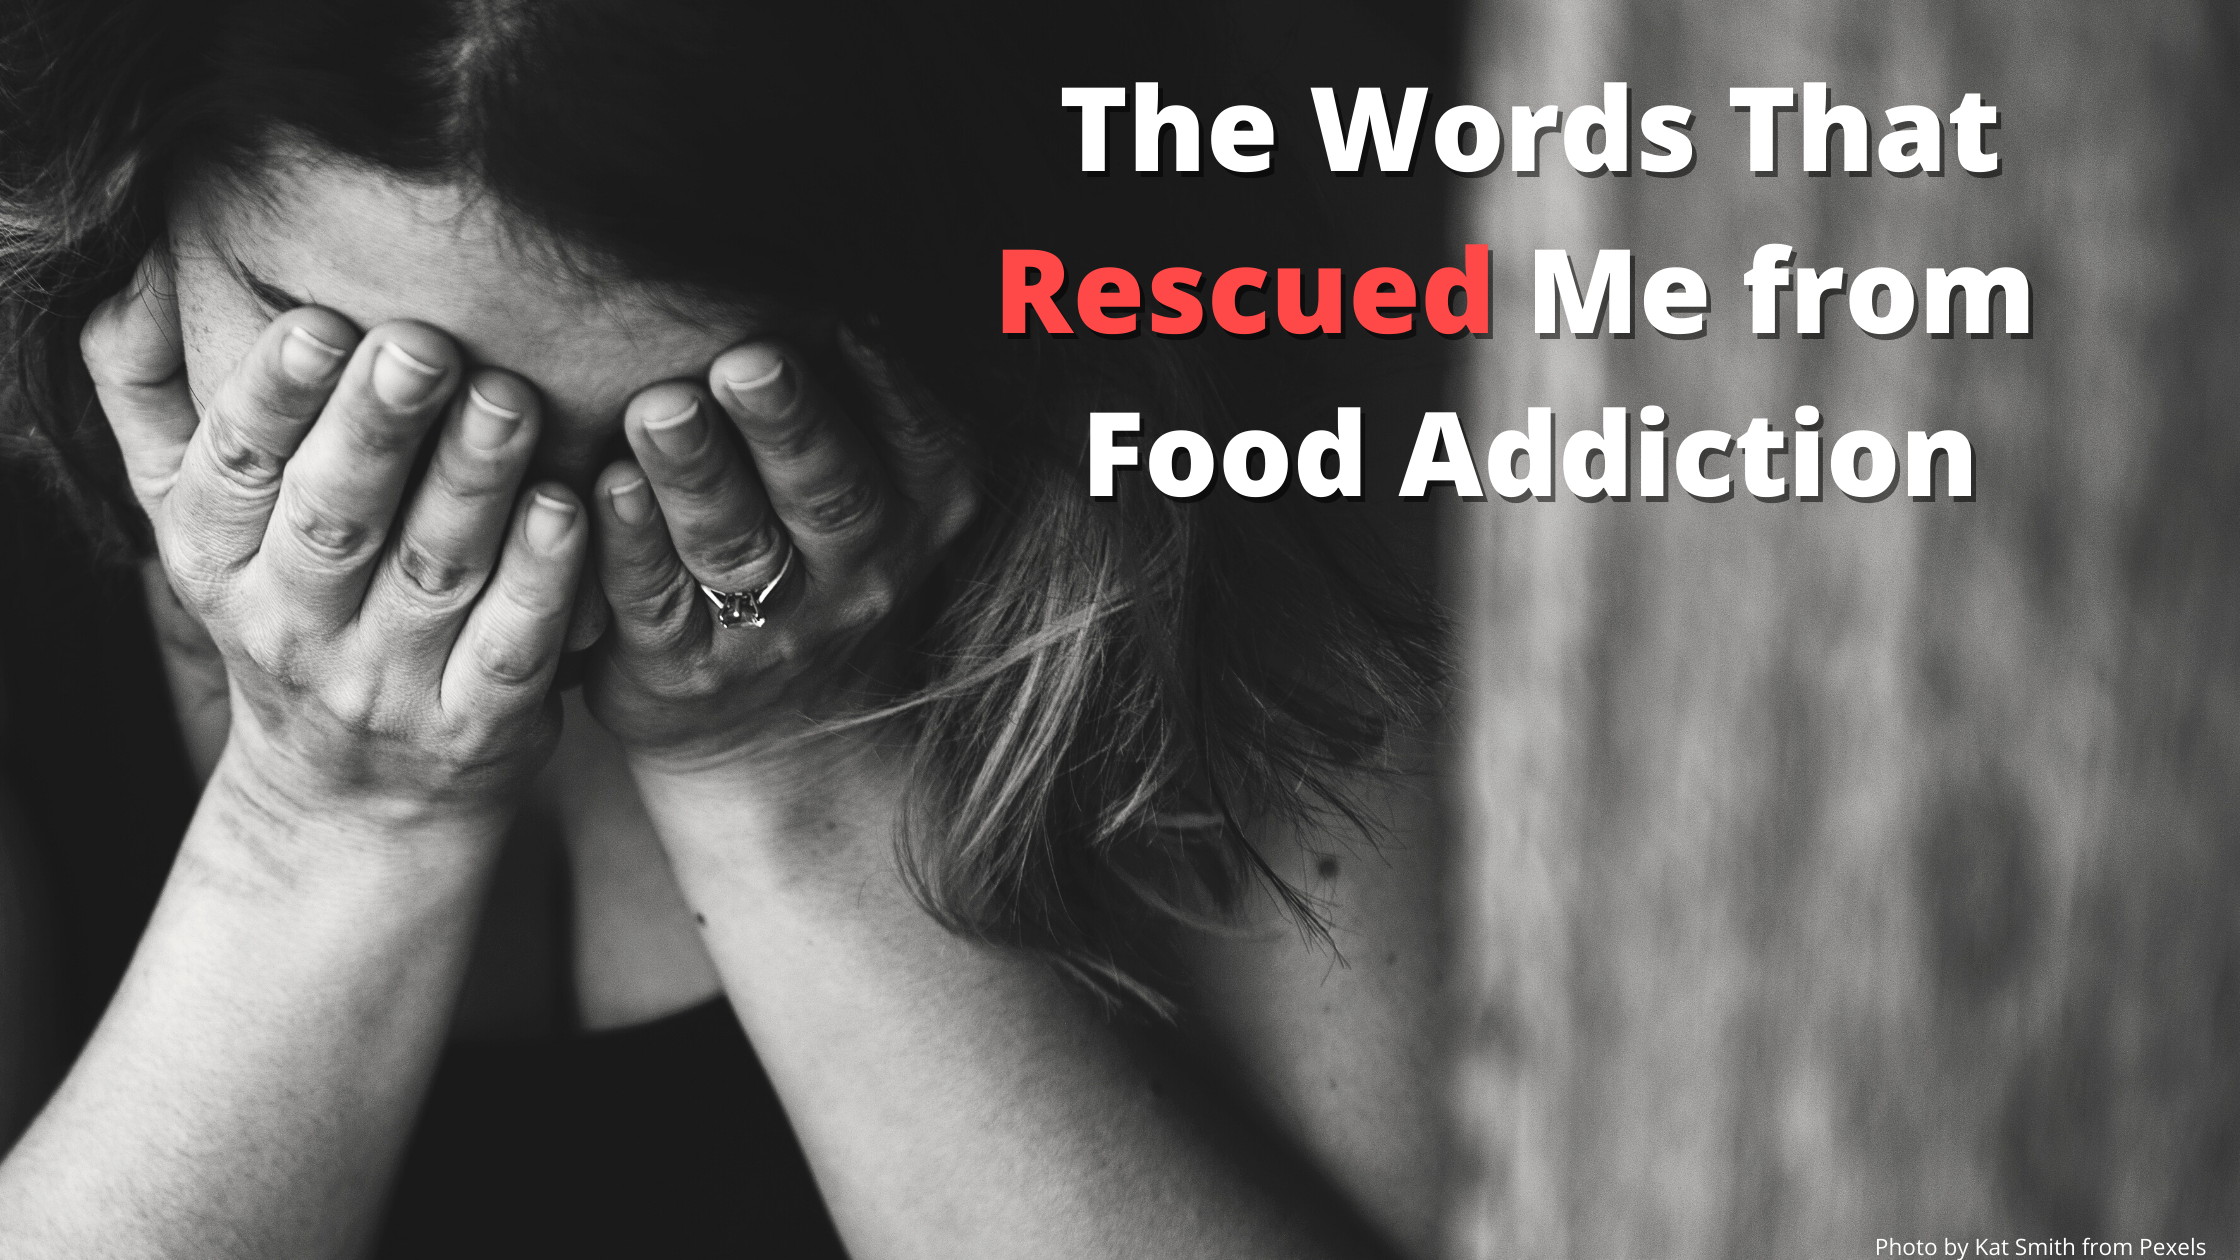 The Words That Rescued Me from Food Addiction